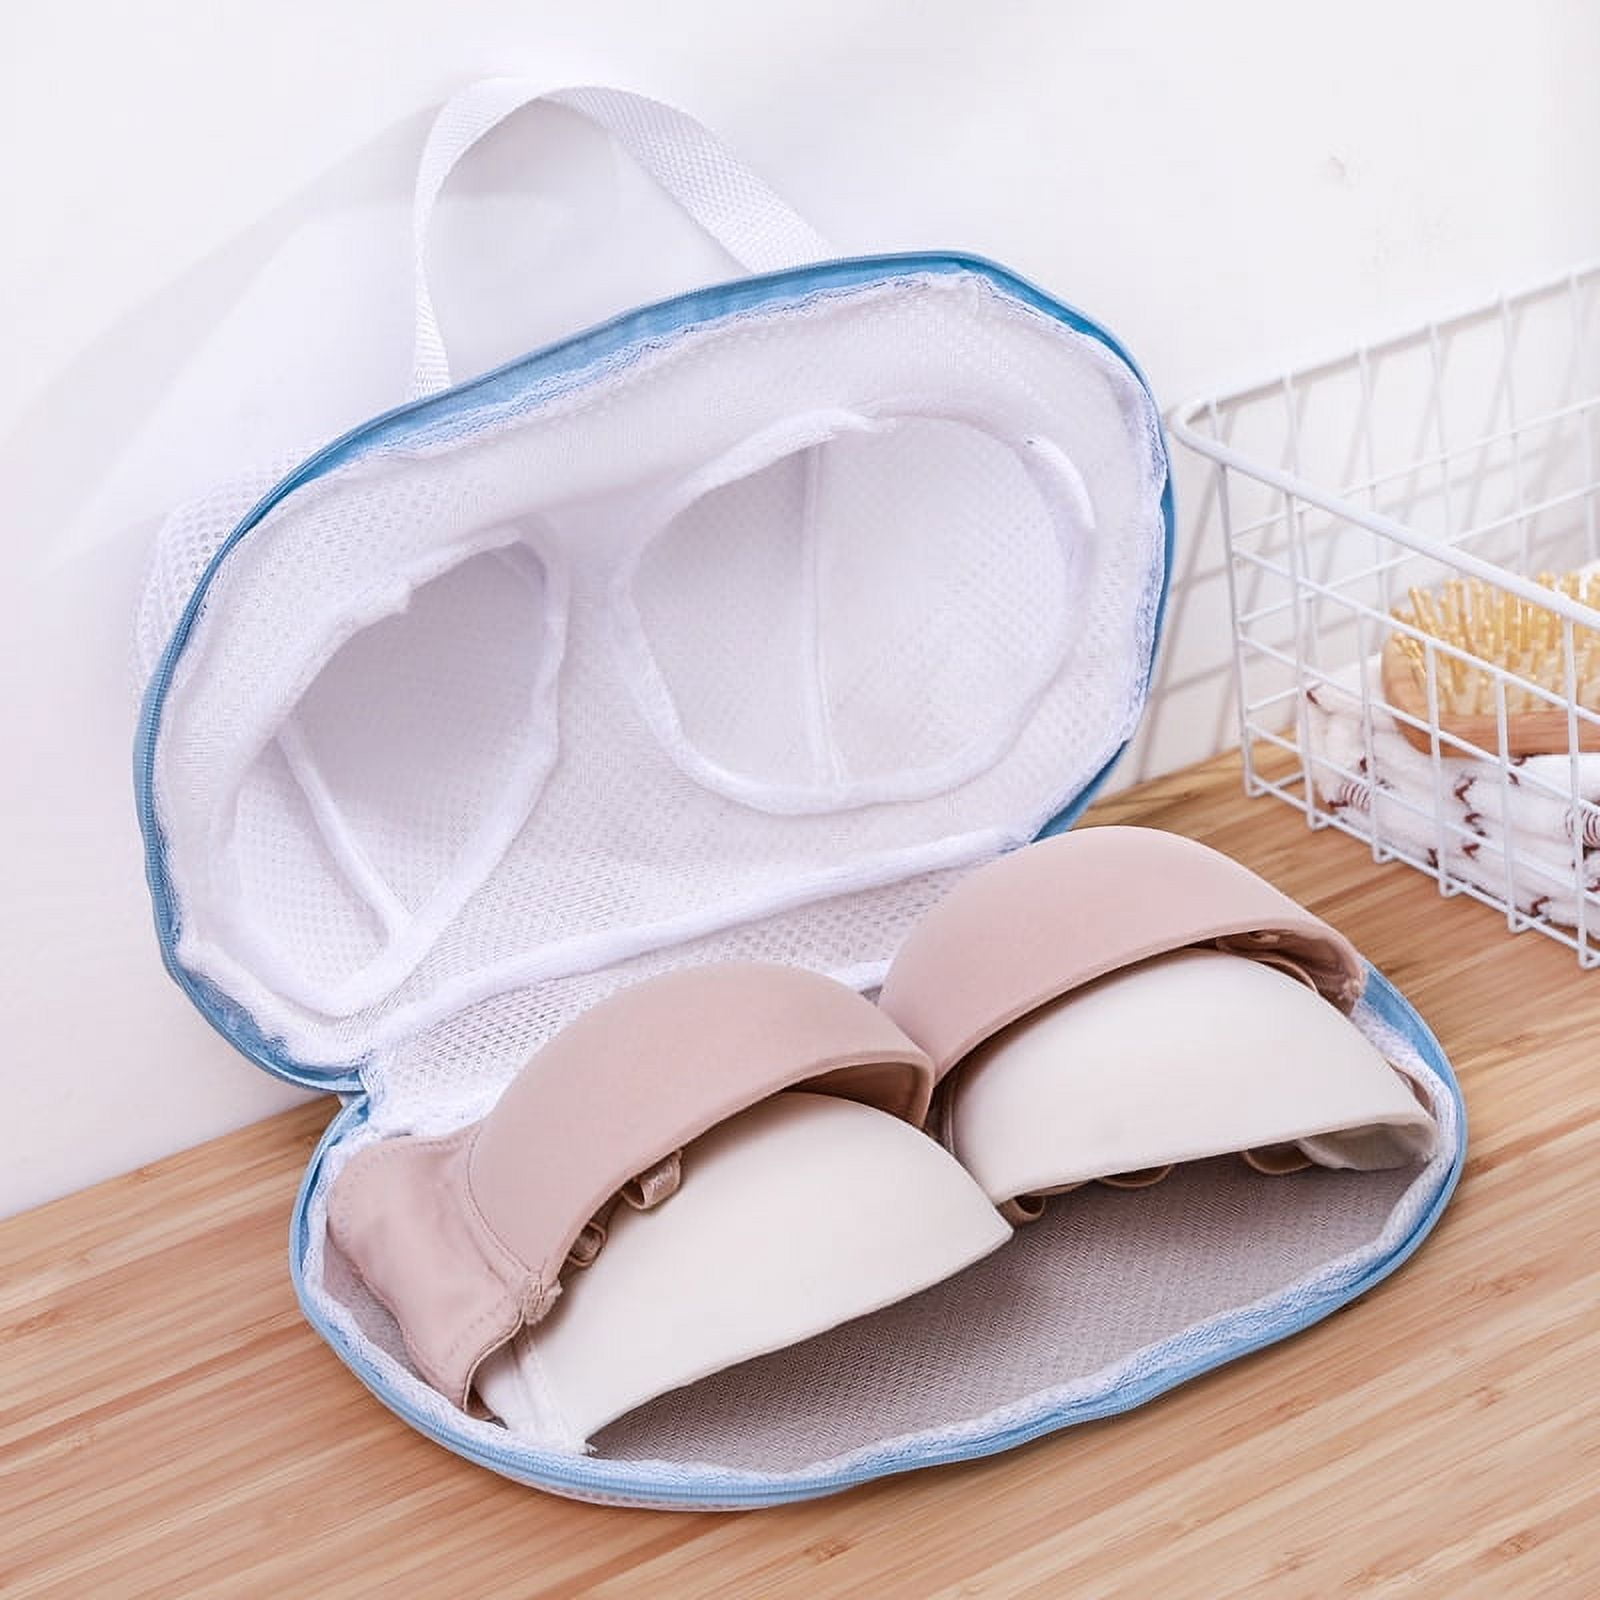 These Laundry Bags Will Keep Your Bras from Getting Warped in the Wash